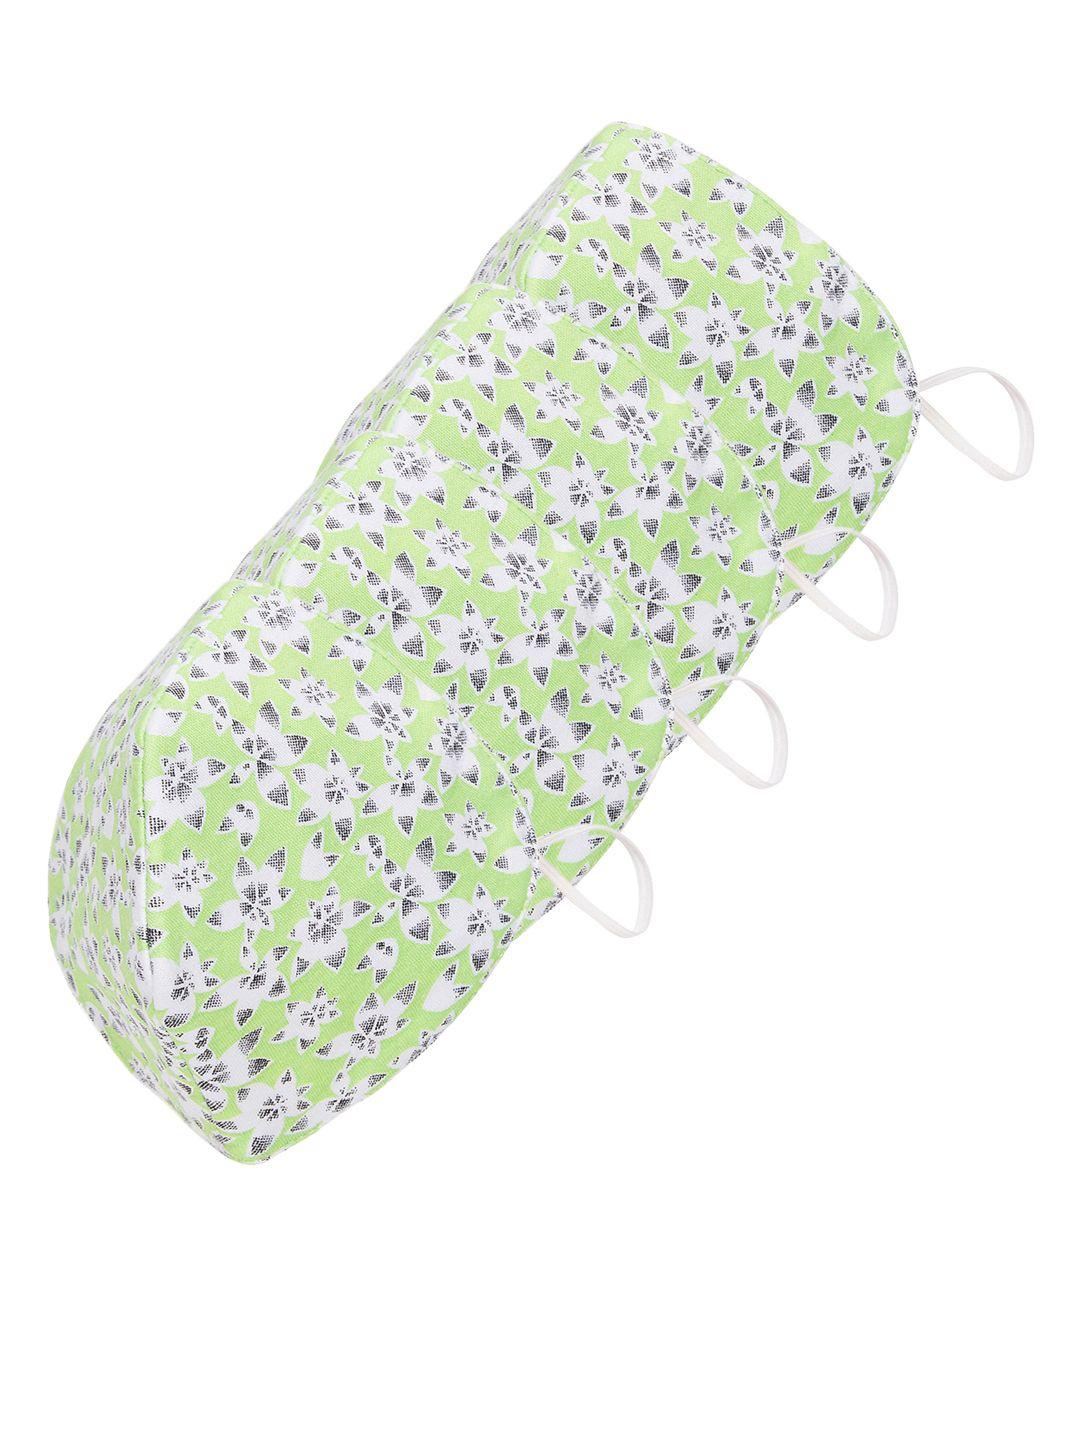 sojanya unisex pack of 4 green & white floral print 3-ply reusable outdoor cloth masks